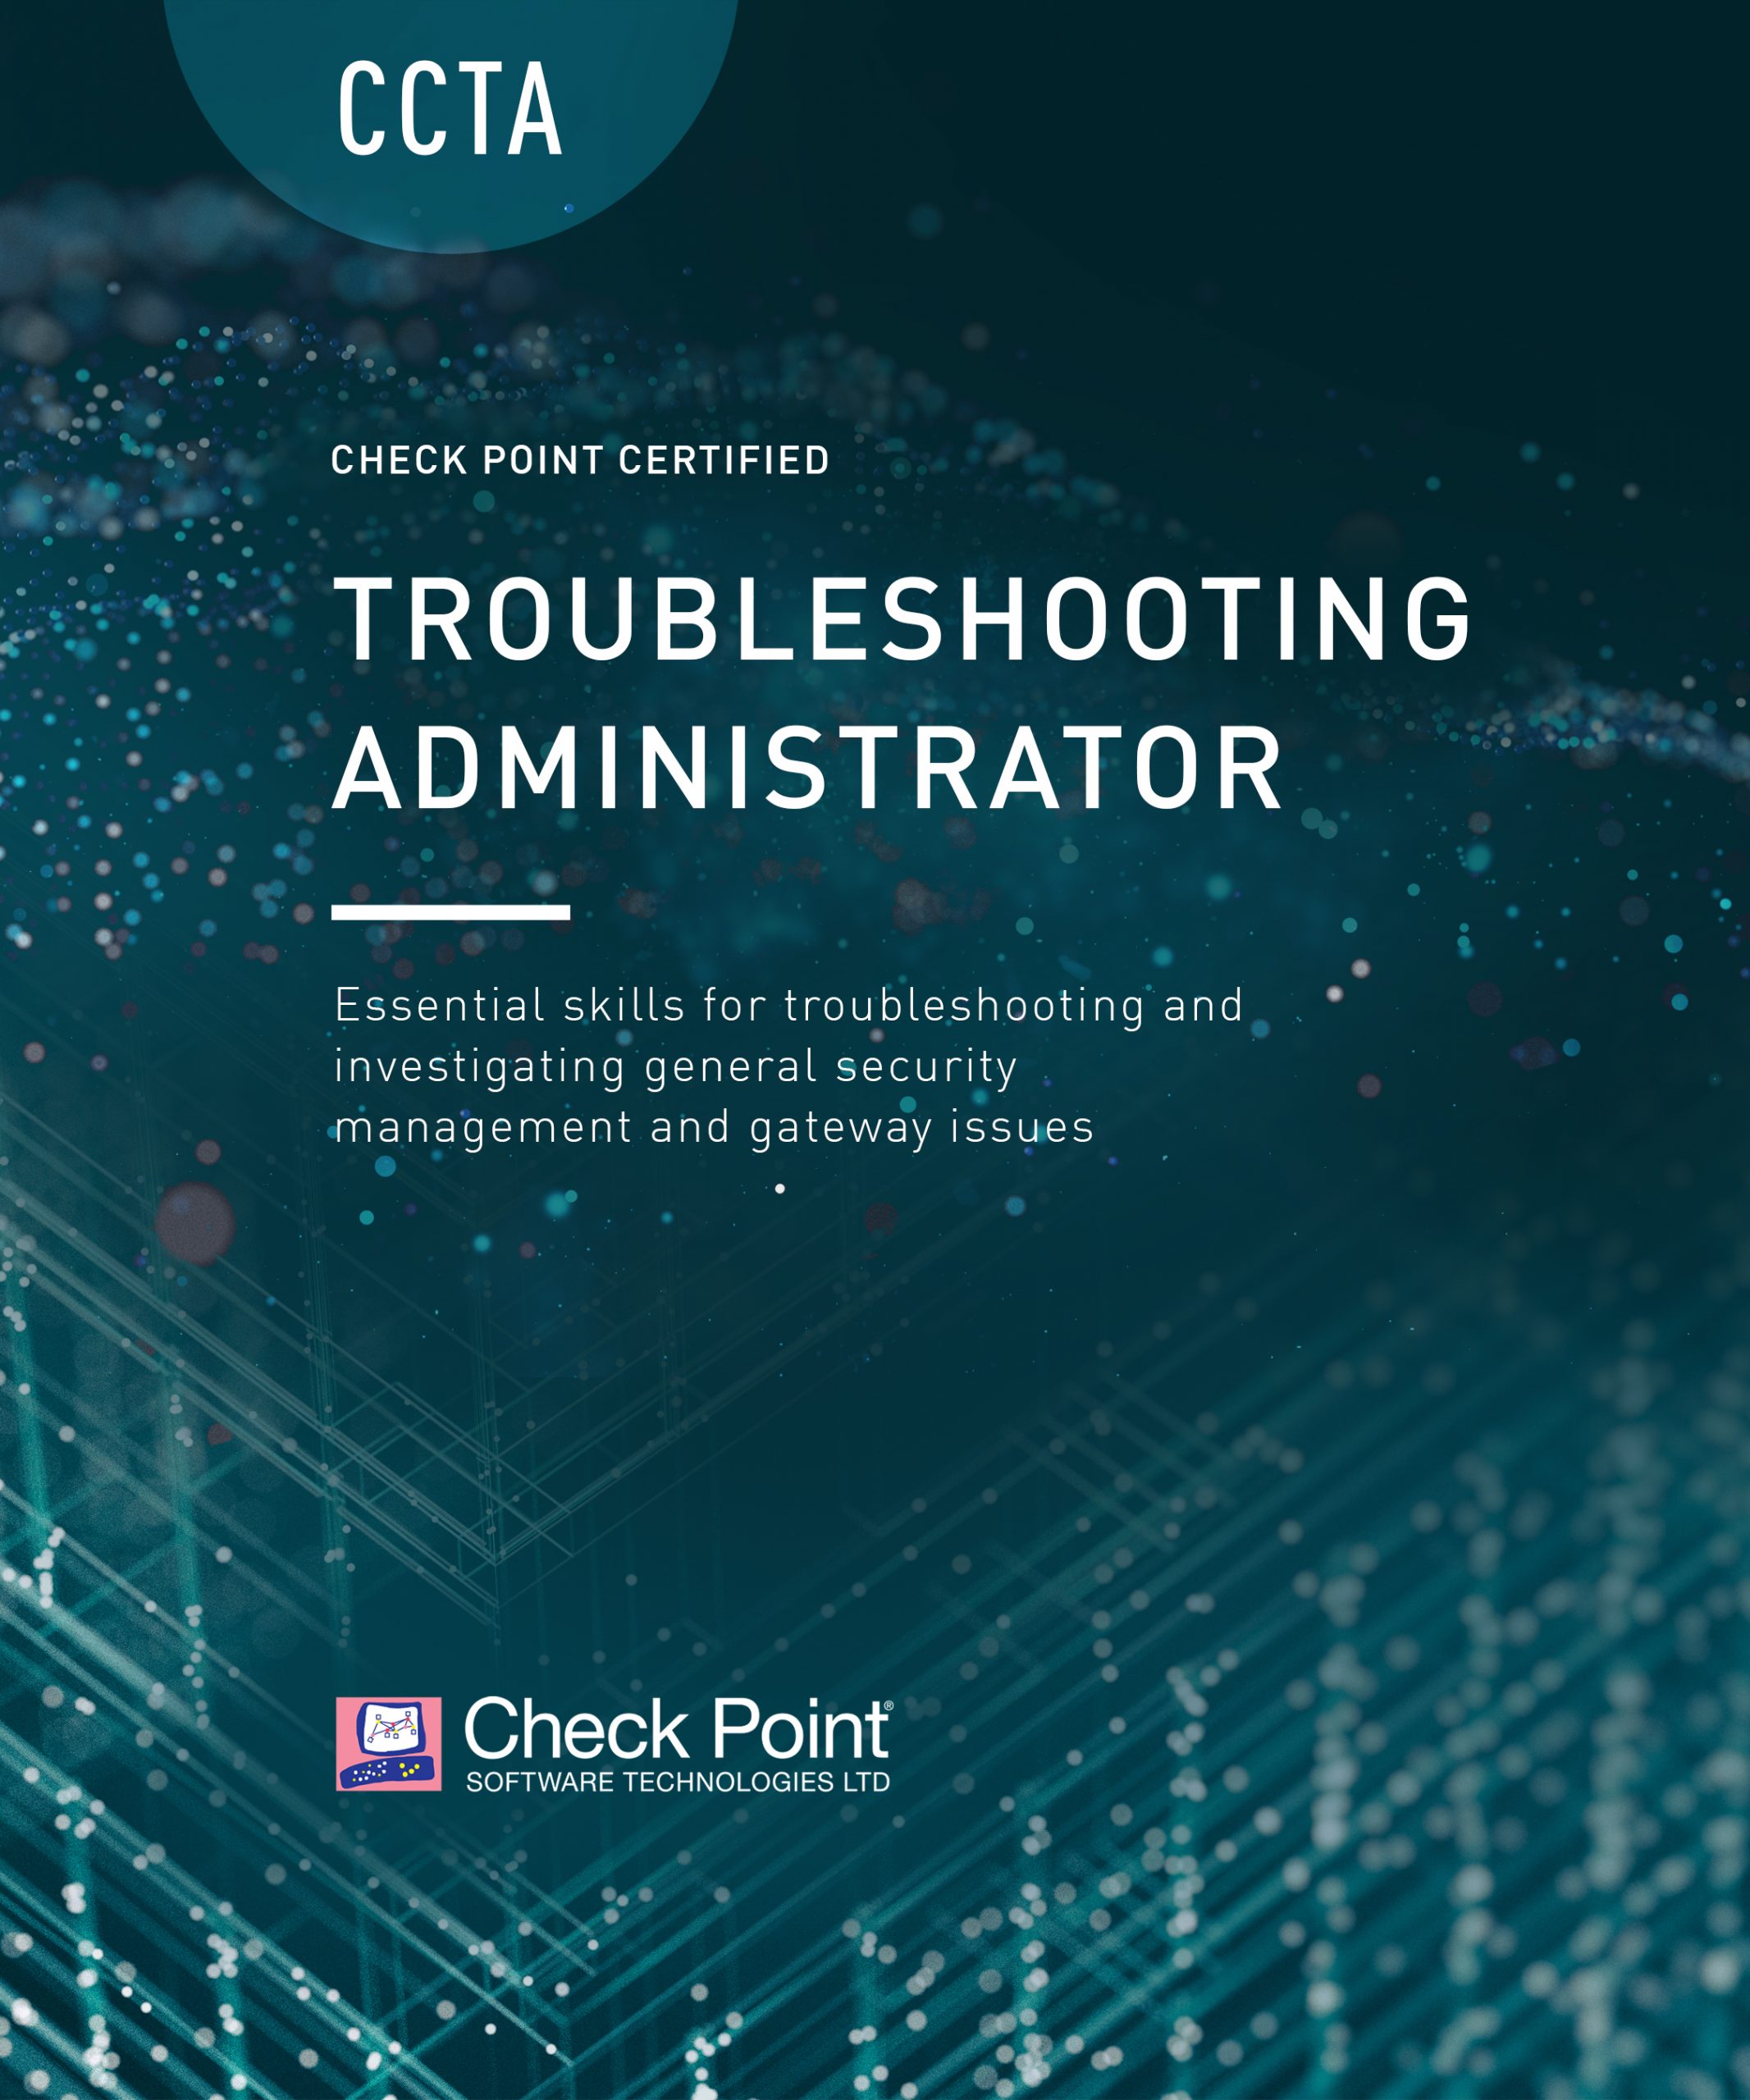 CPT-CCTA – Check Point Certified Troubleshooting Administrator (CCTA)